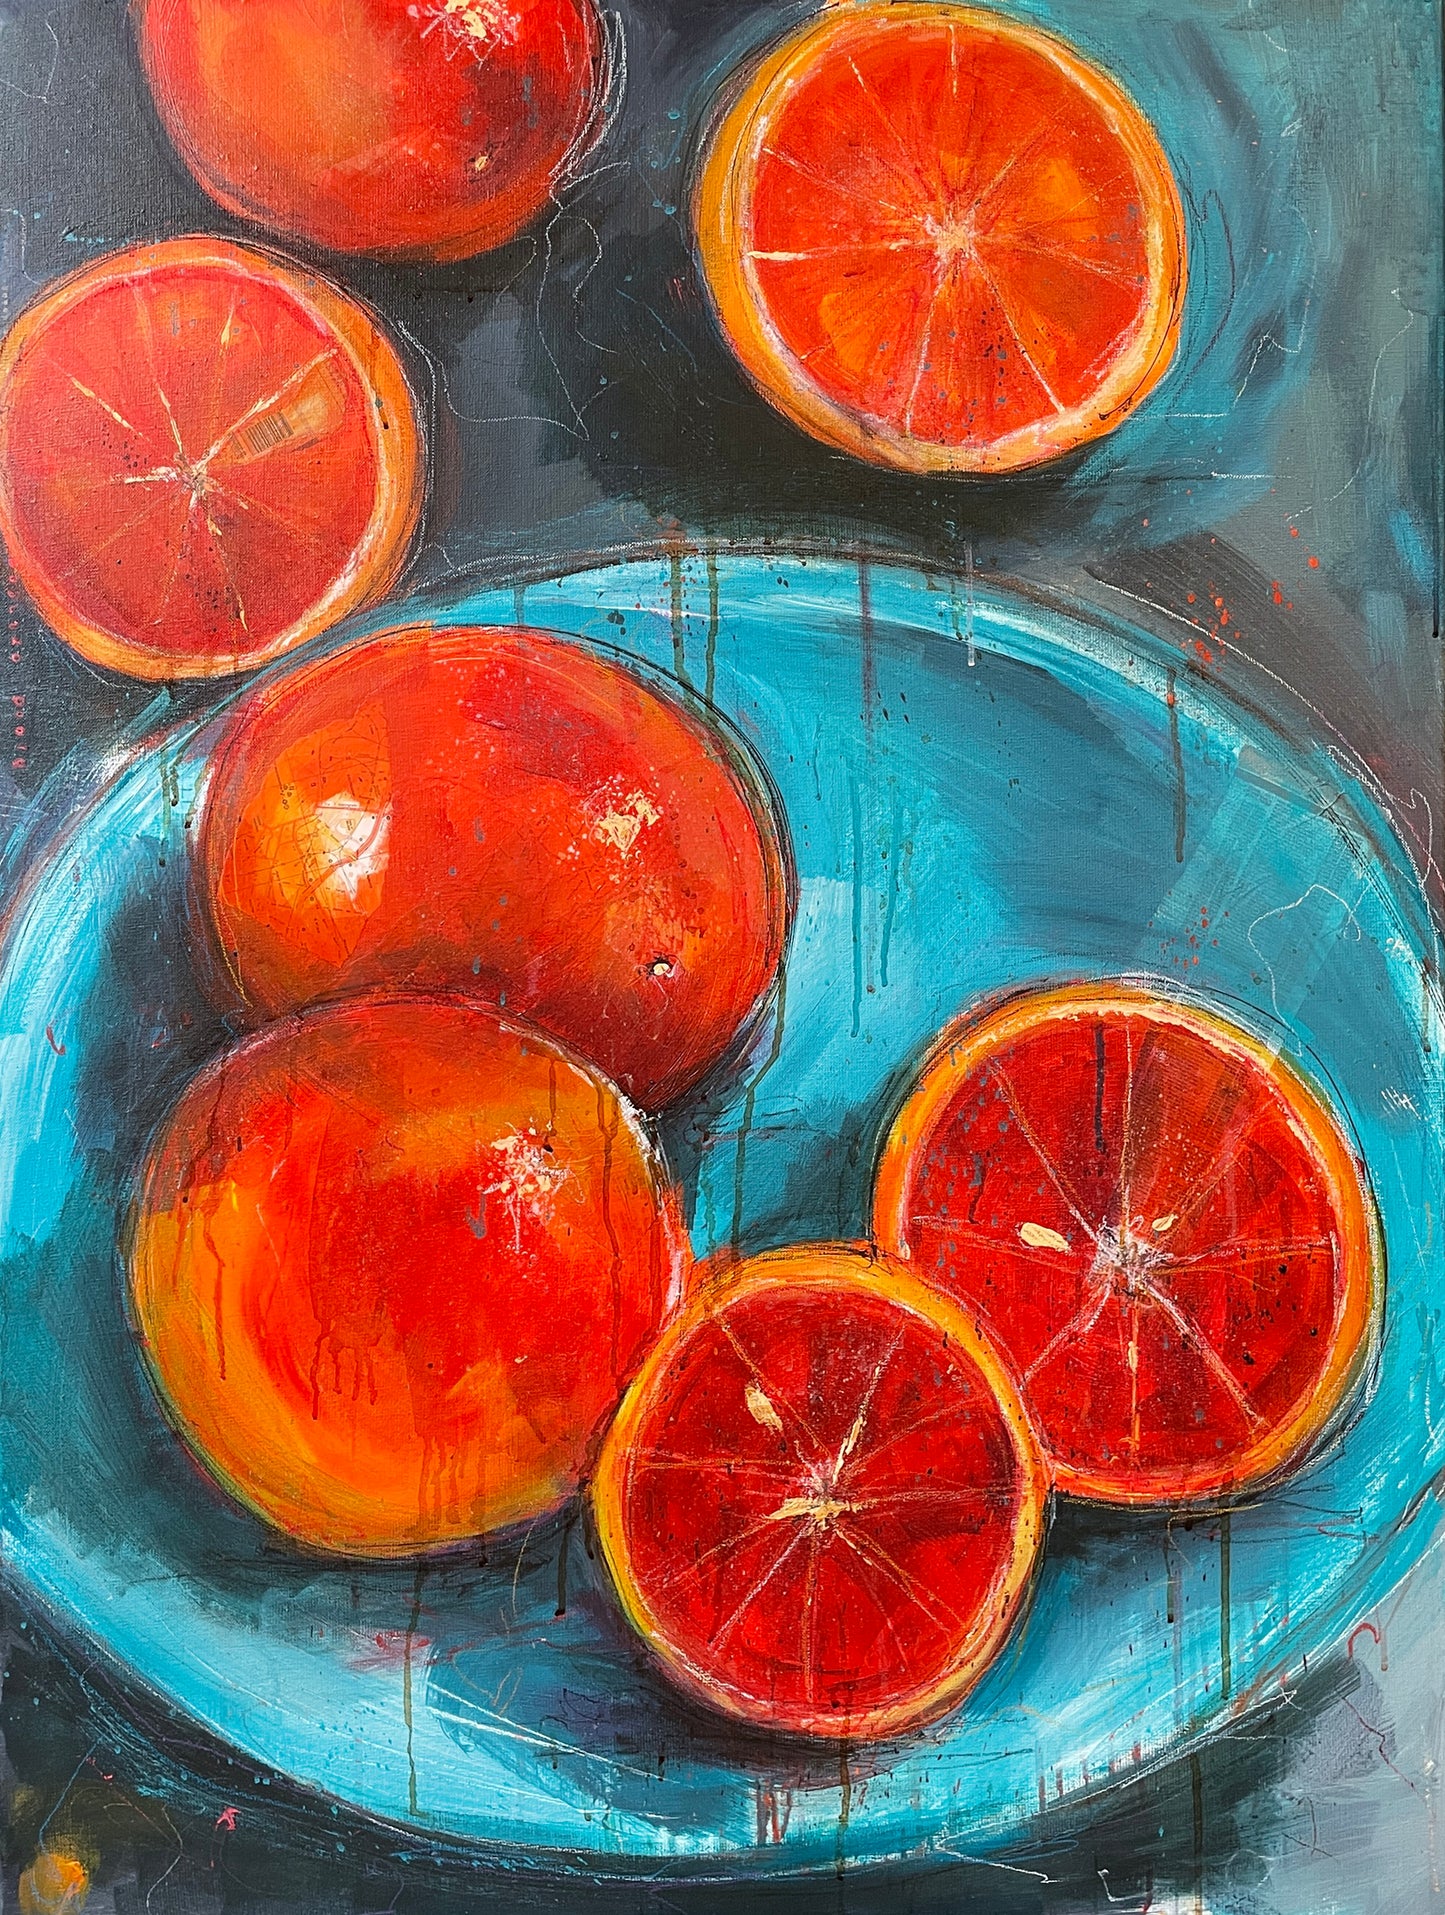 Large canvas acrylic and collage of blood oranges